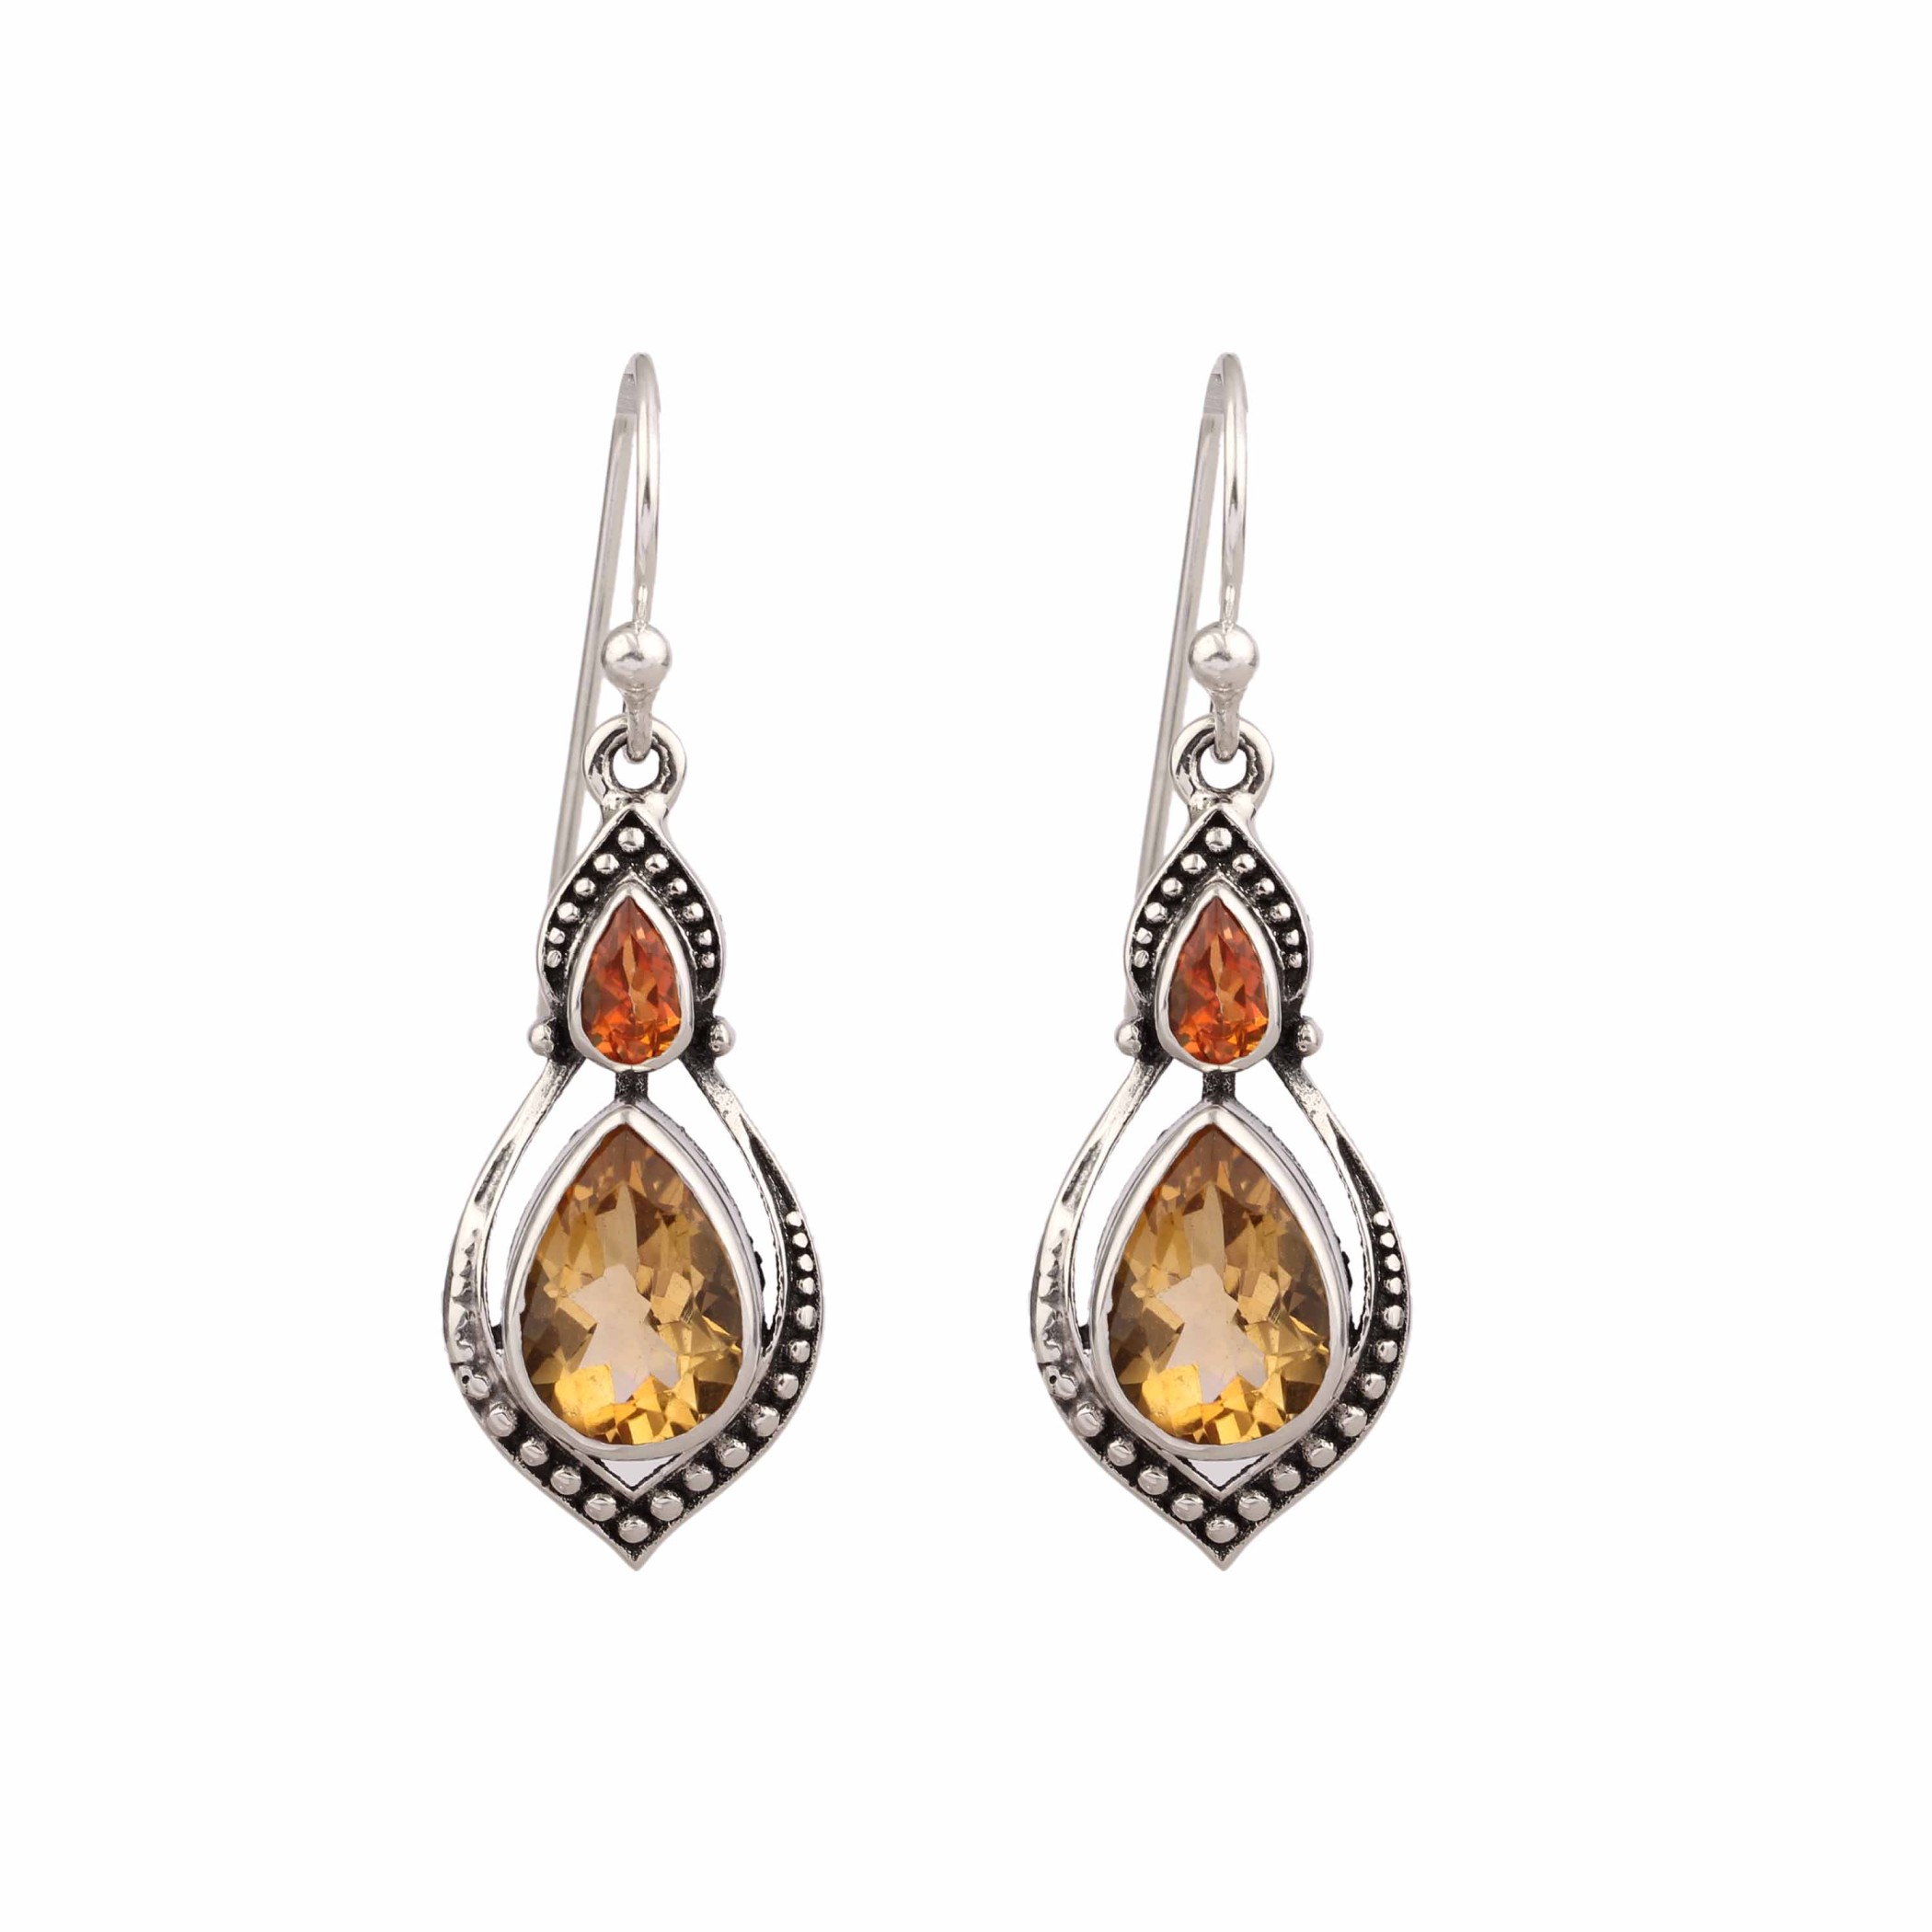 925 Sterling Silver Jewelry With Citrine and Honey Topaz Gemstone Earring